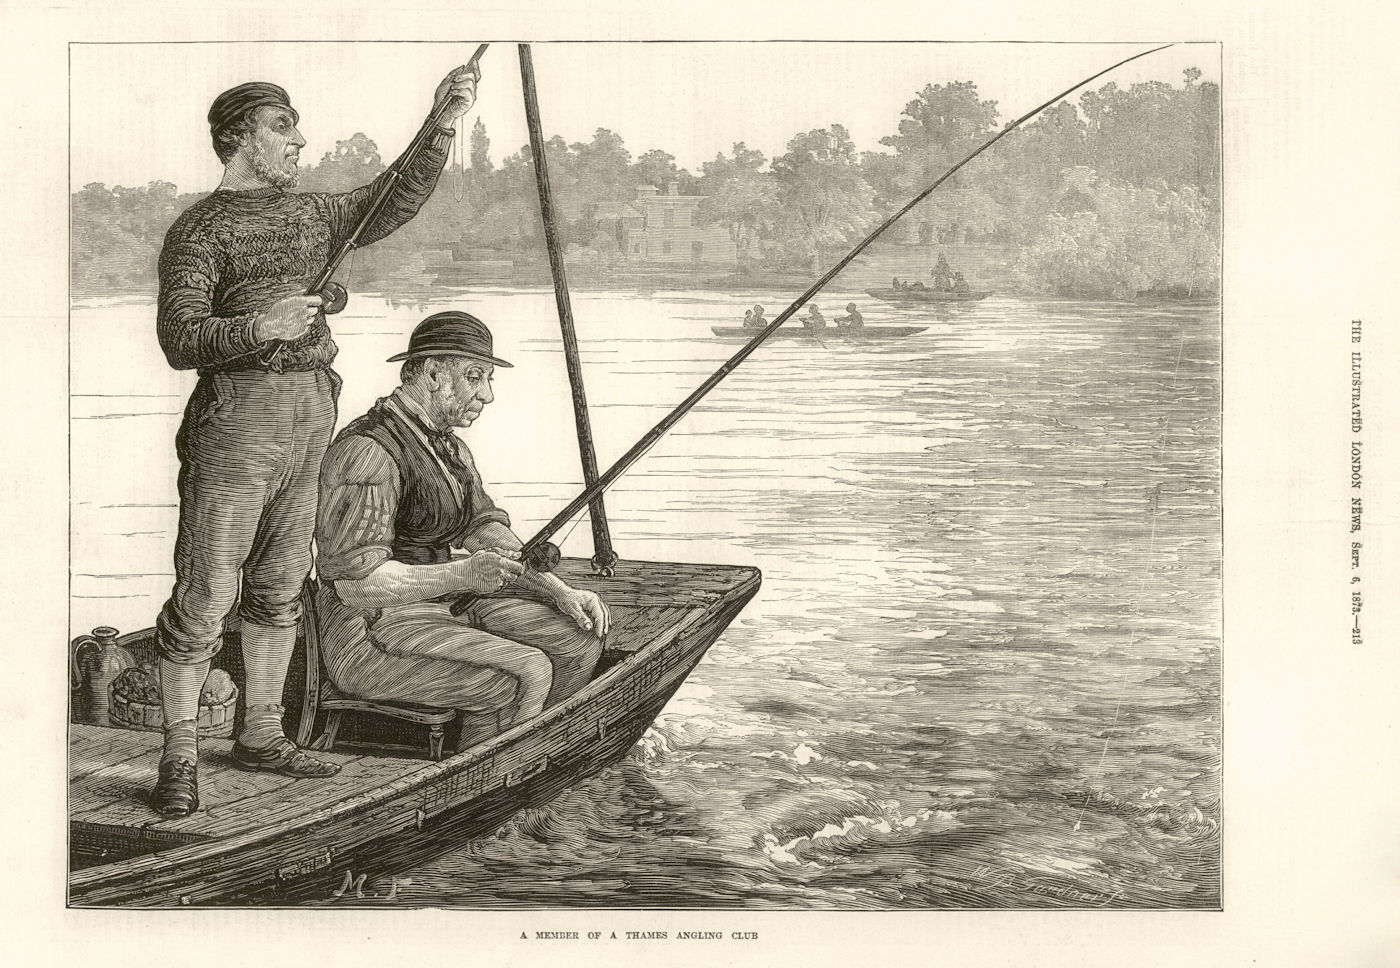 Associate Product A member of a Thames angling club. Fishing 1873 antique ILN full page print